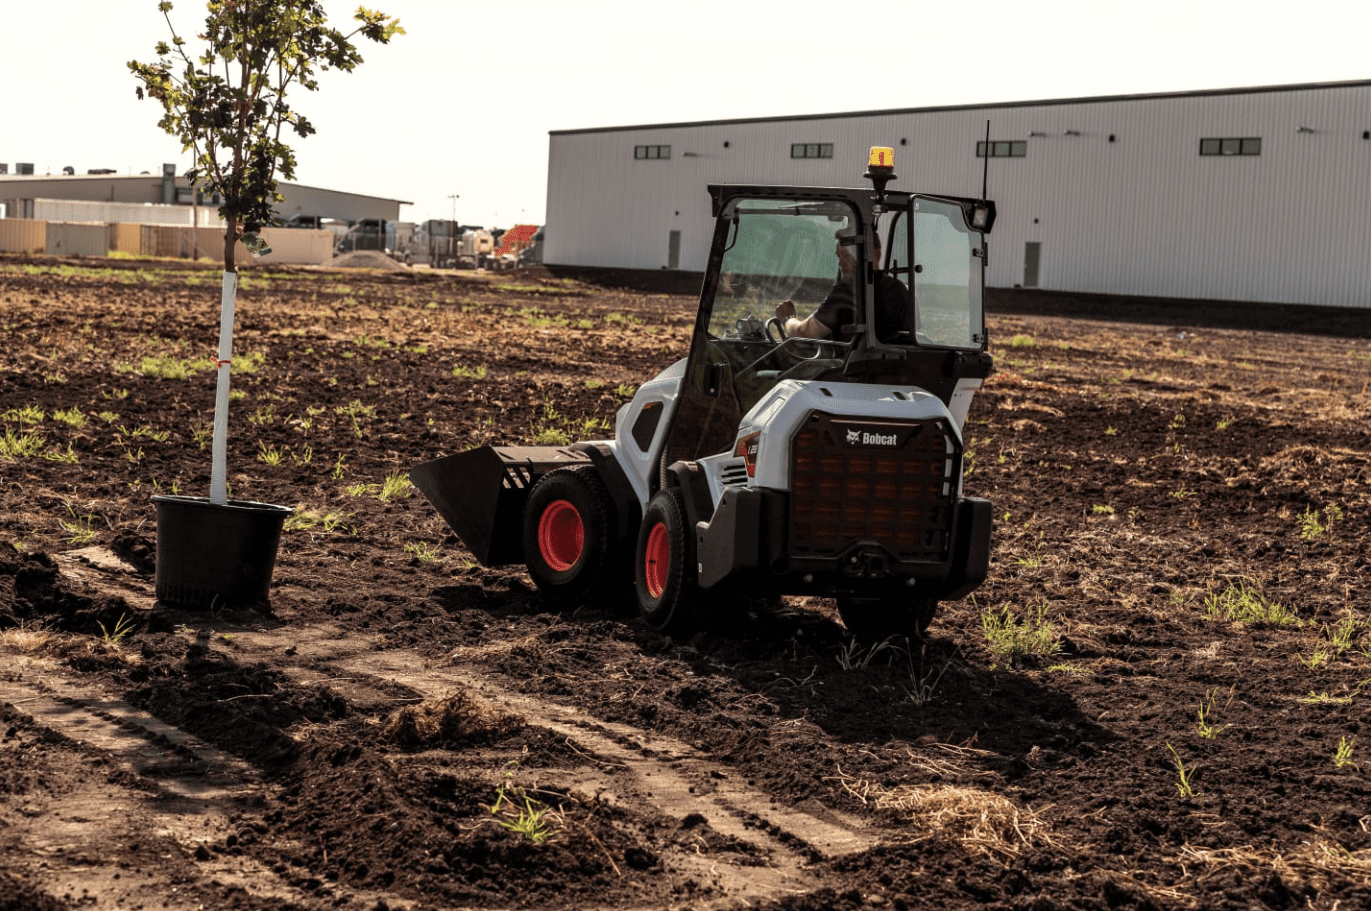 Browse Specs and more for the L28 Small Articulated Loader - Bobcat of the Rockies